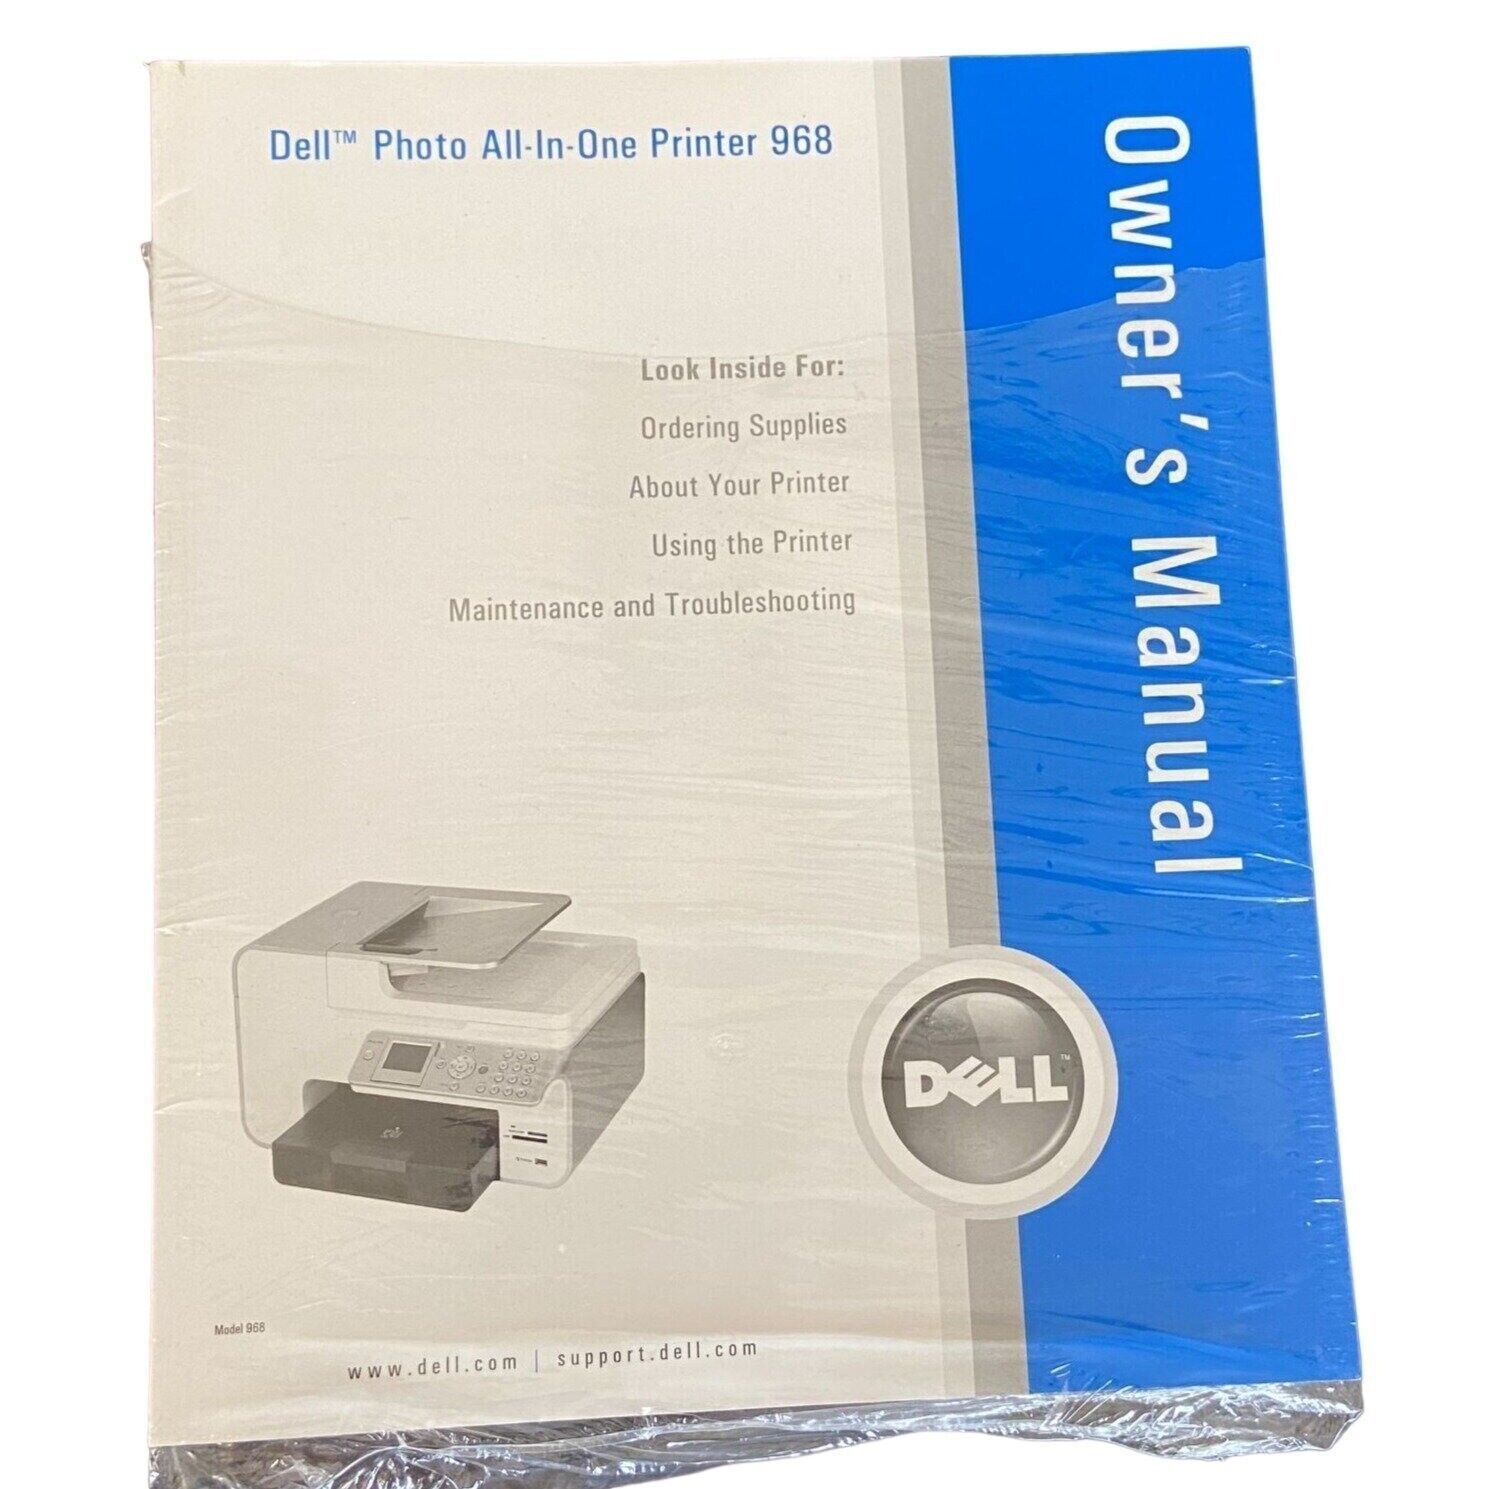 Dell Photo All-in-One Printer Owners Manual and 50 similar items